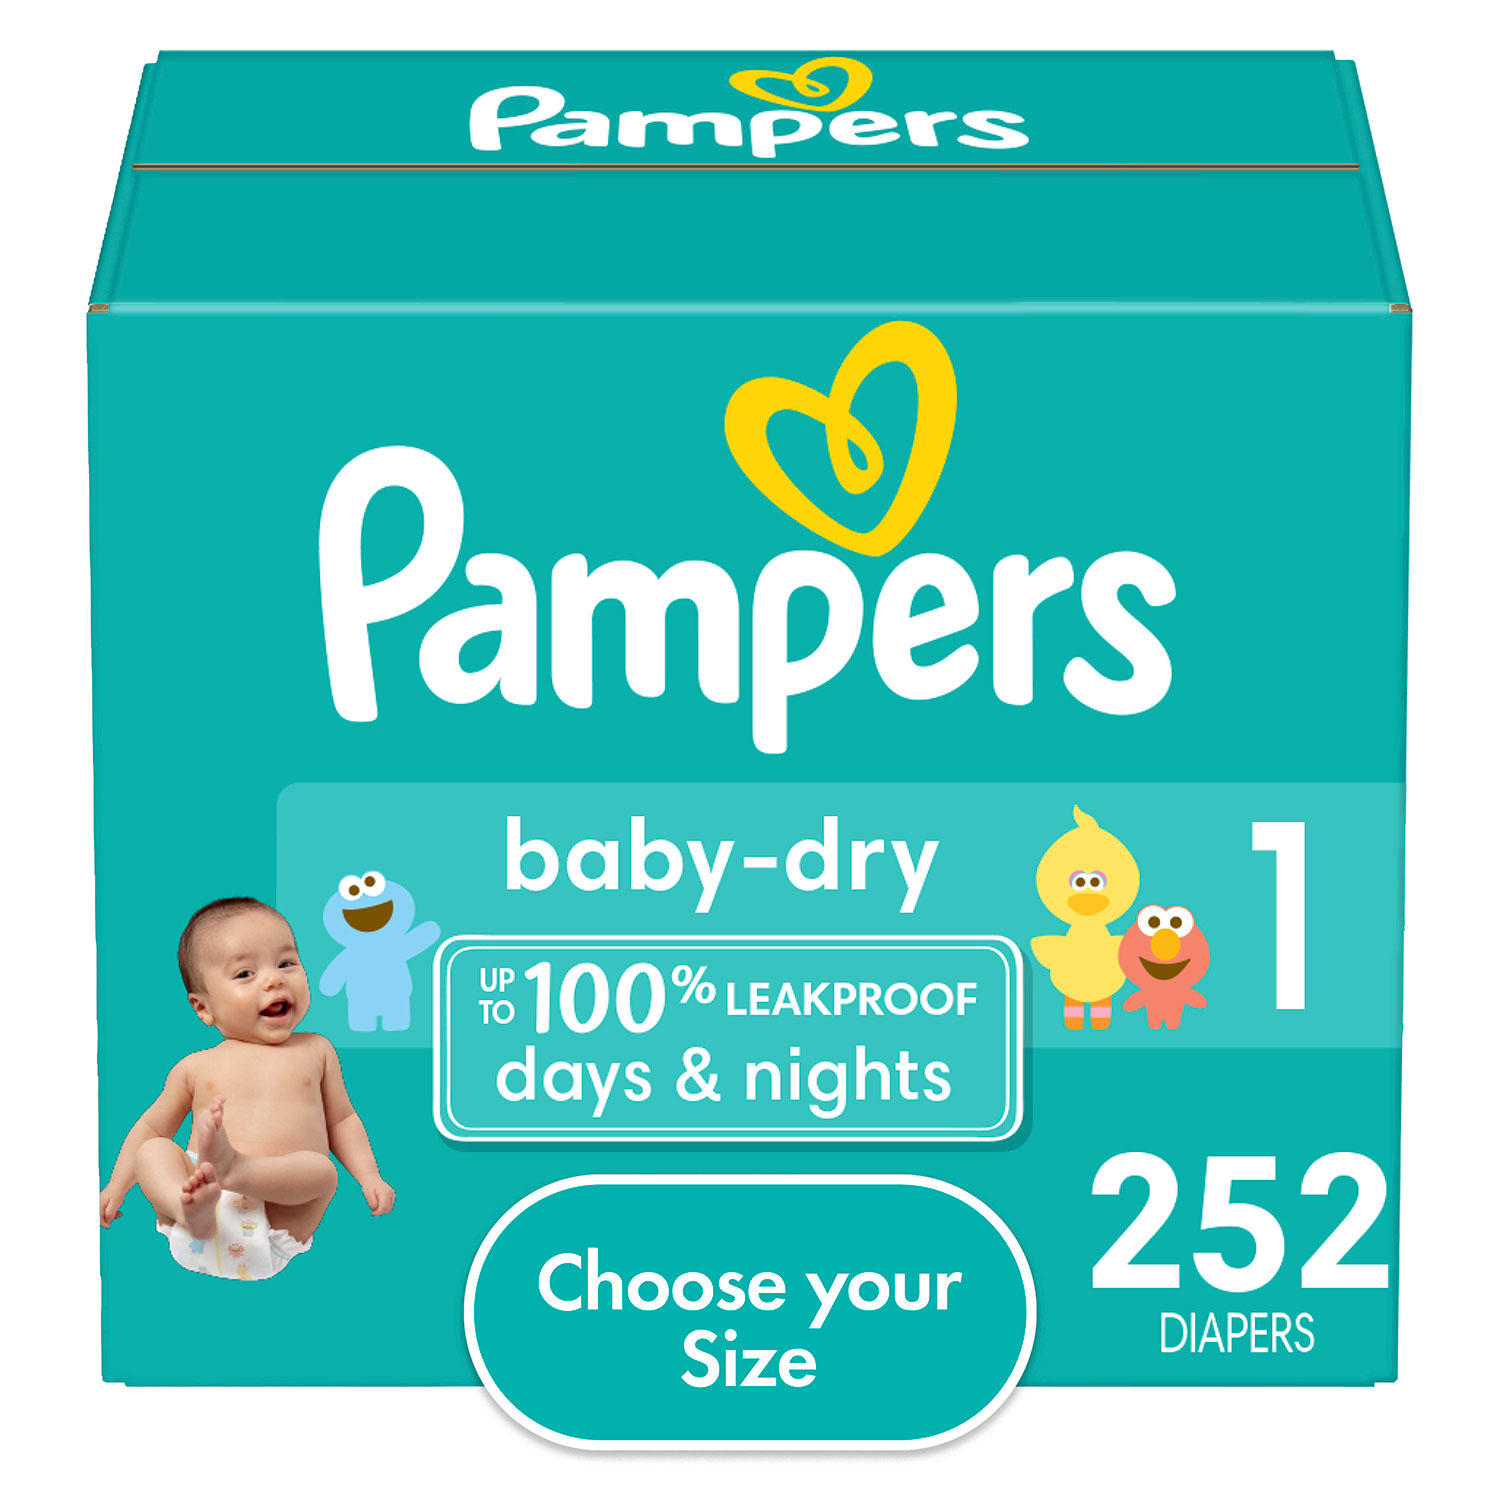 Pampers Baby Dry One-Month Supply Diapers, Size 1 - 252 ct.